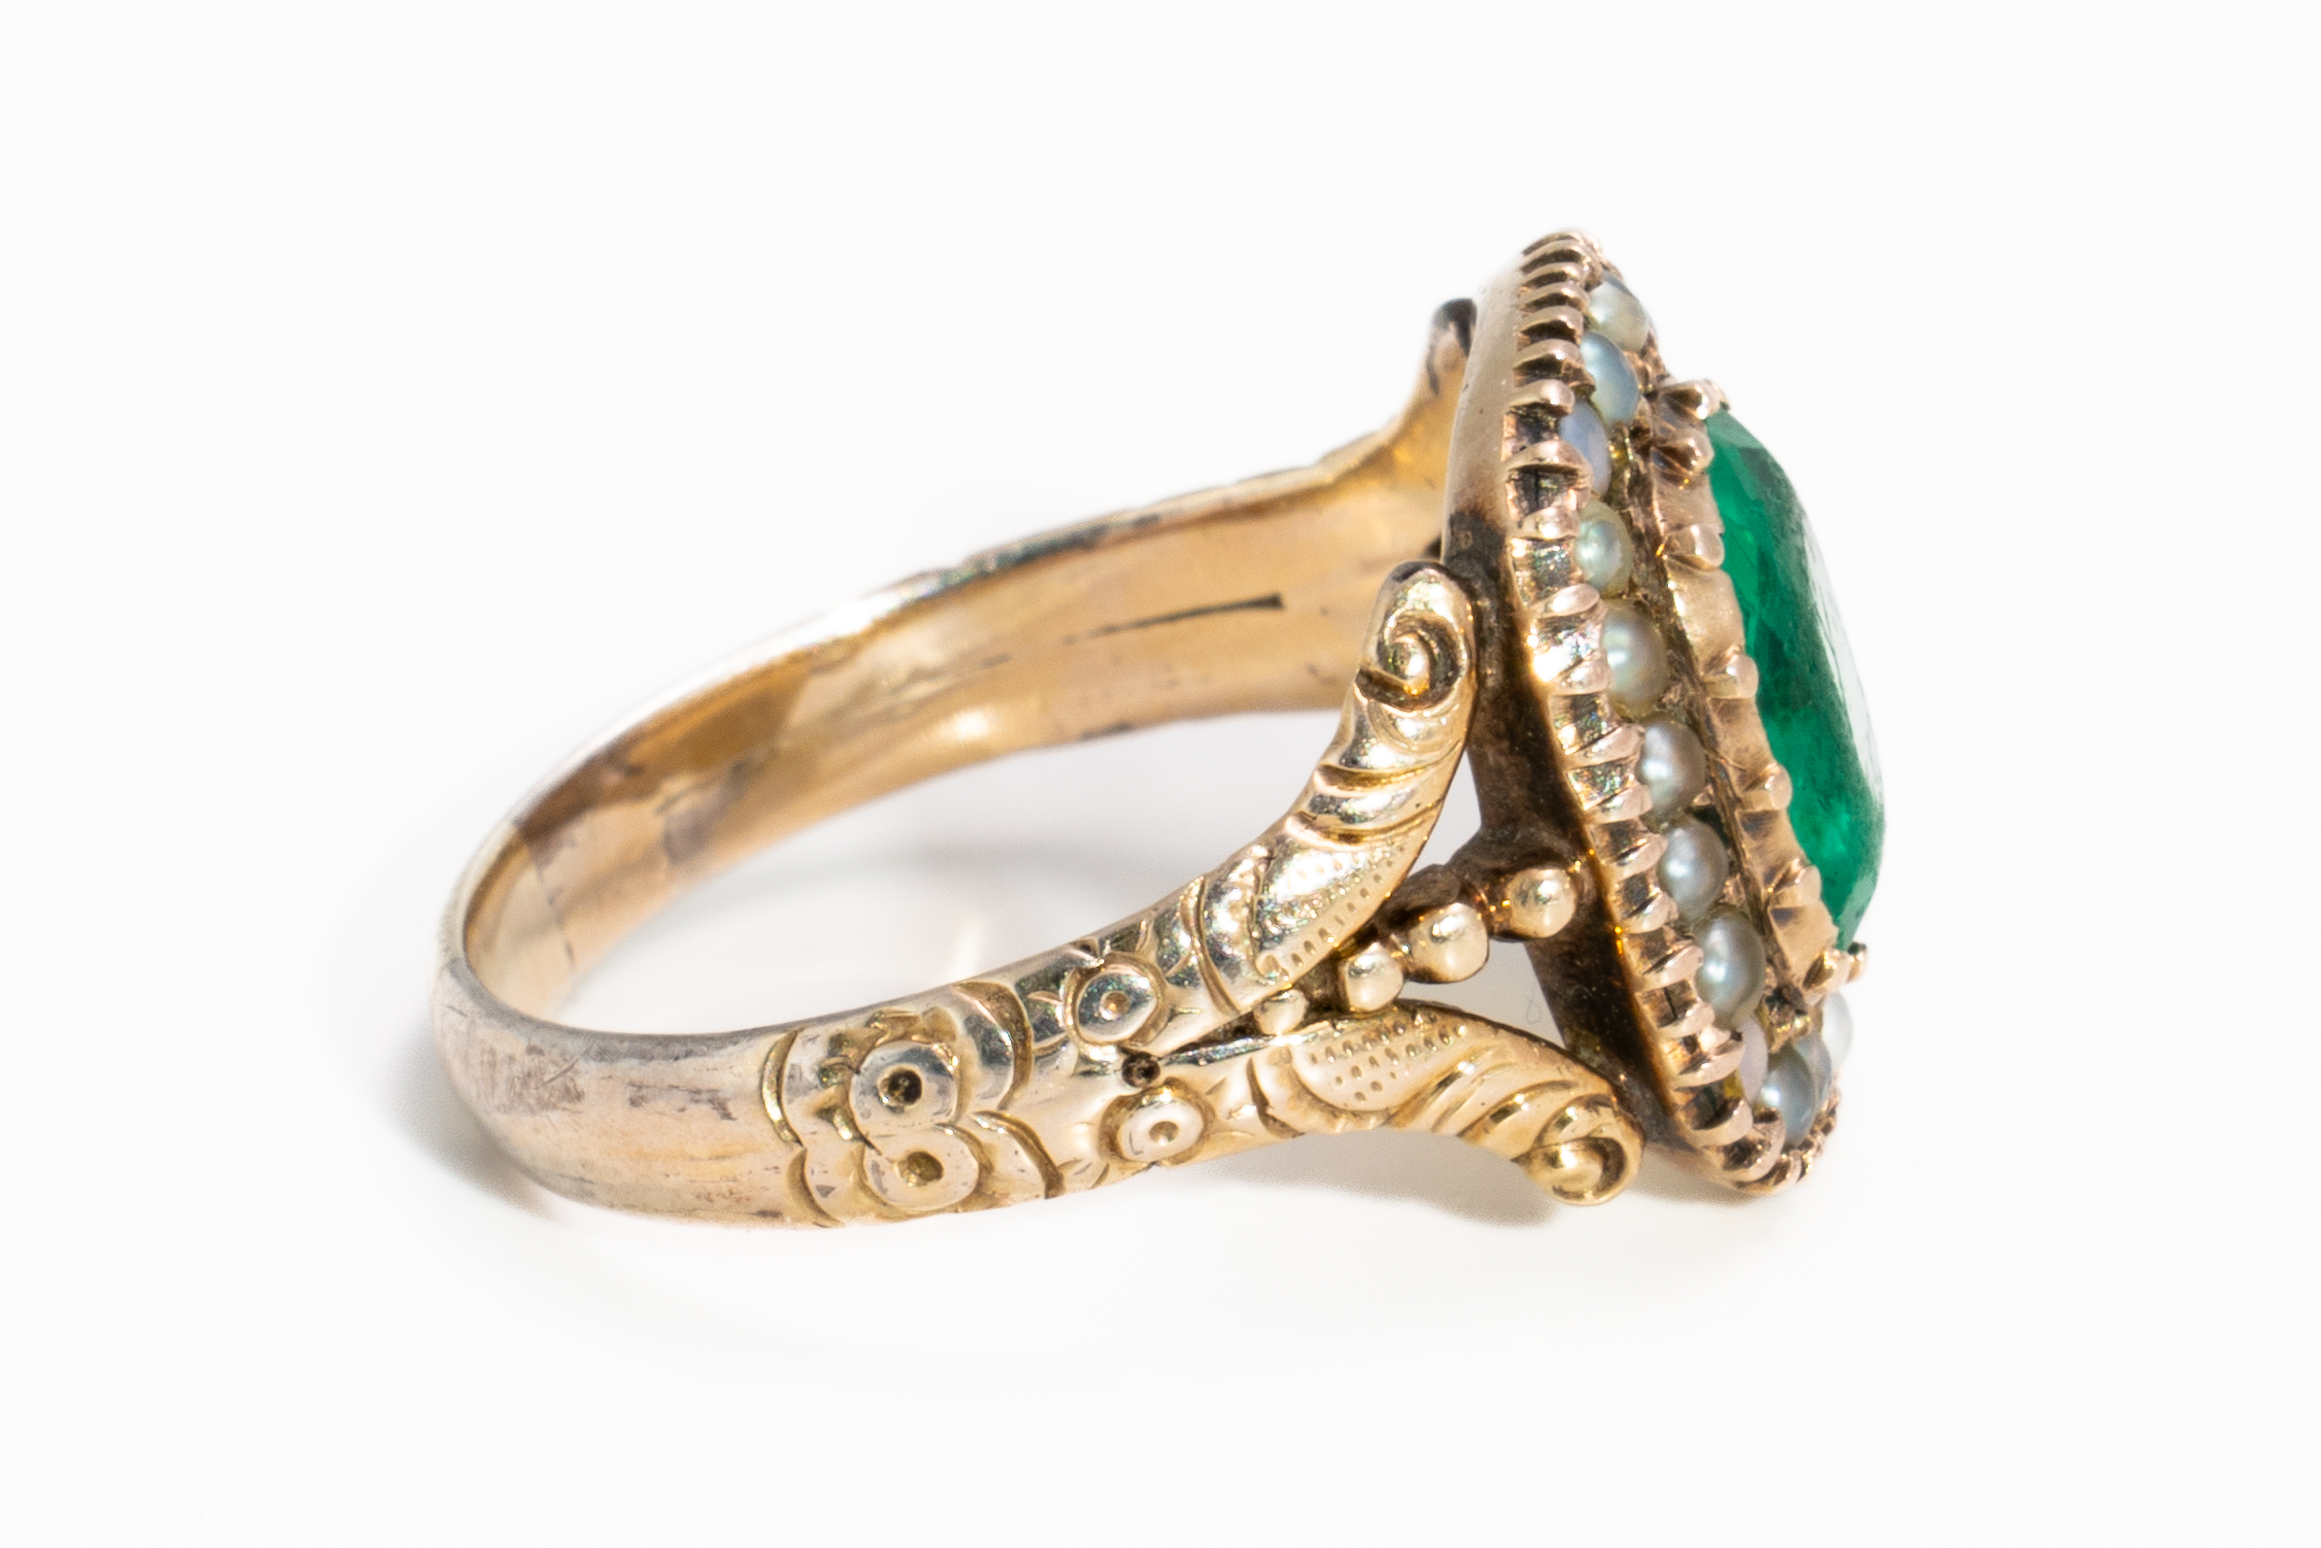 A GEORGIAN GOLD, GREEN PASTE AND SEED PEARL RING - Image 2 of 3